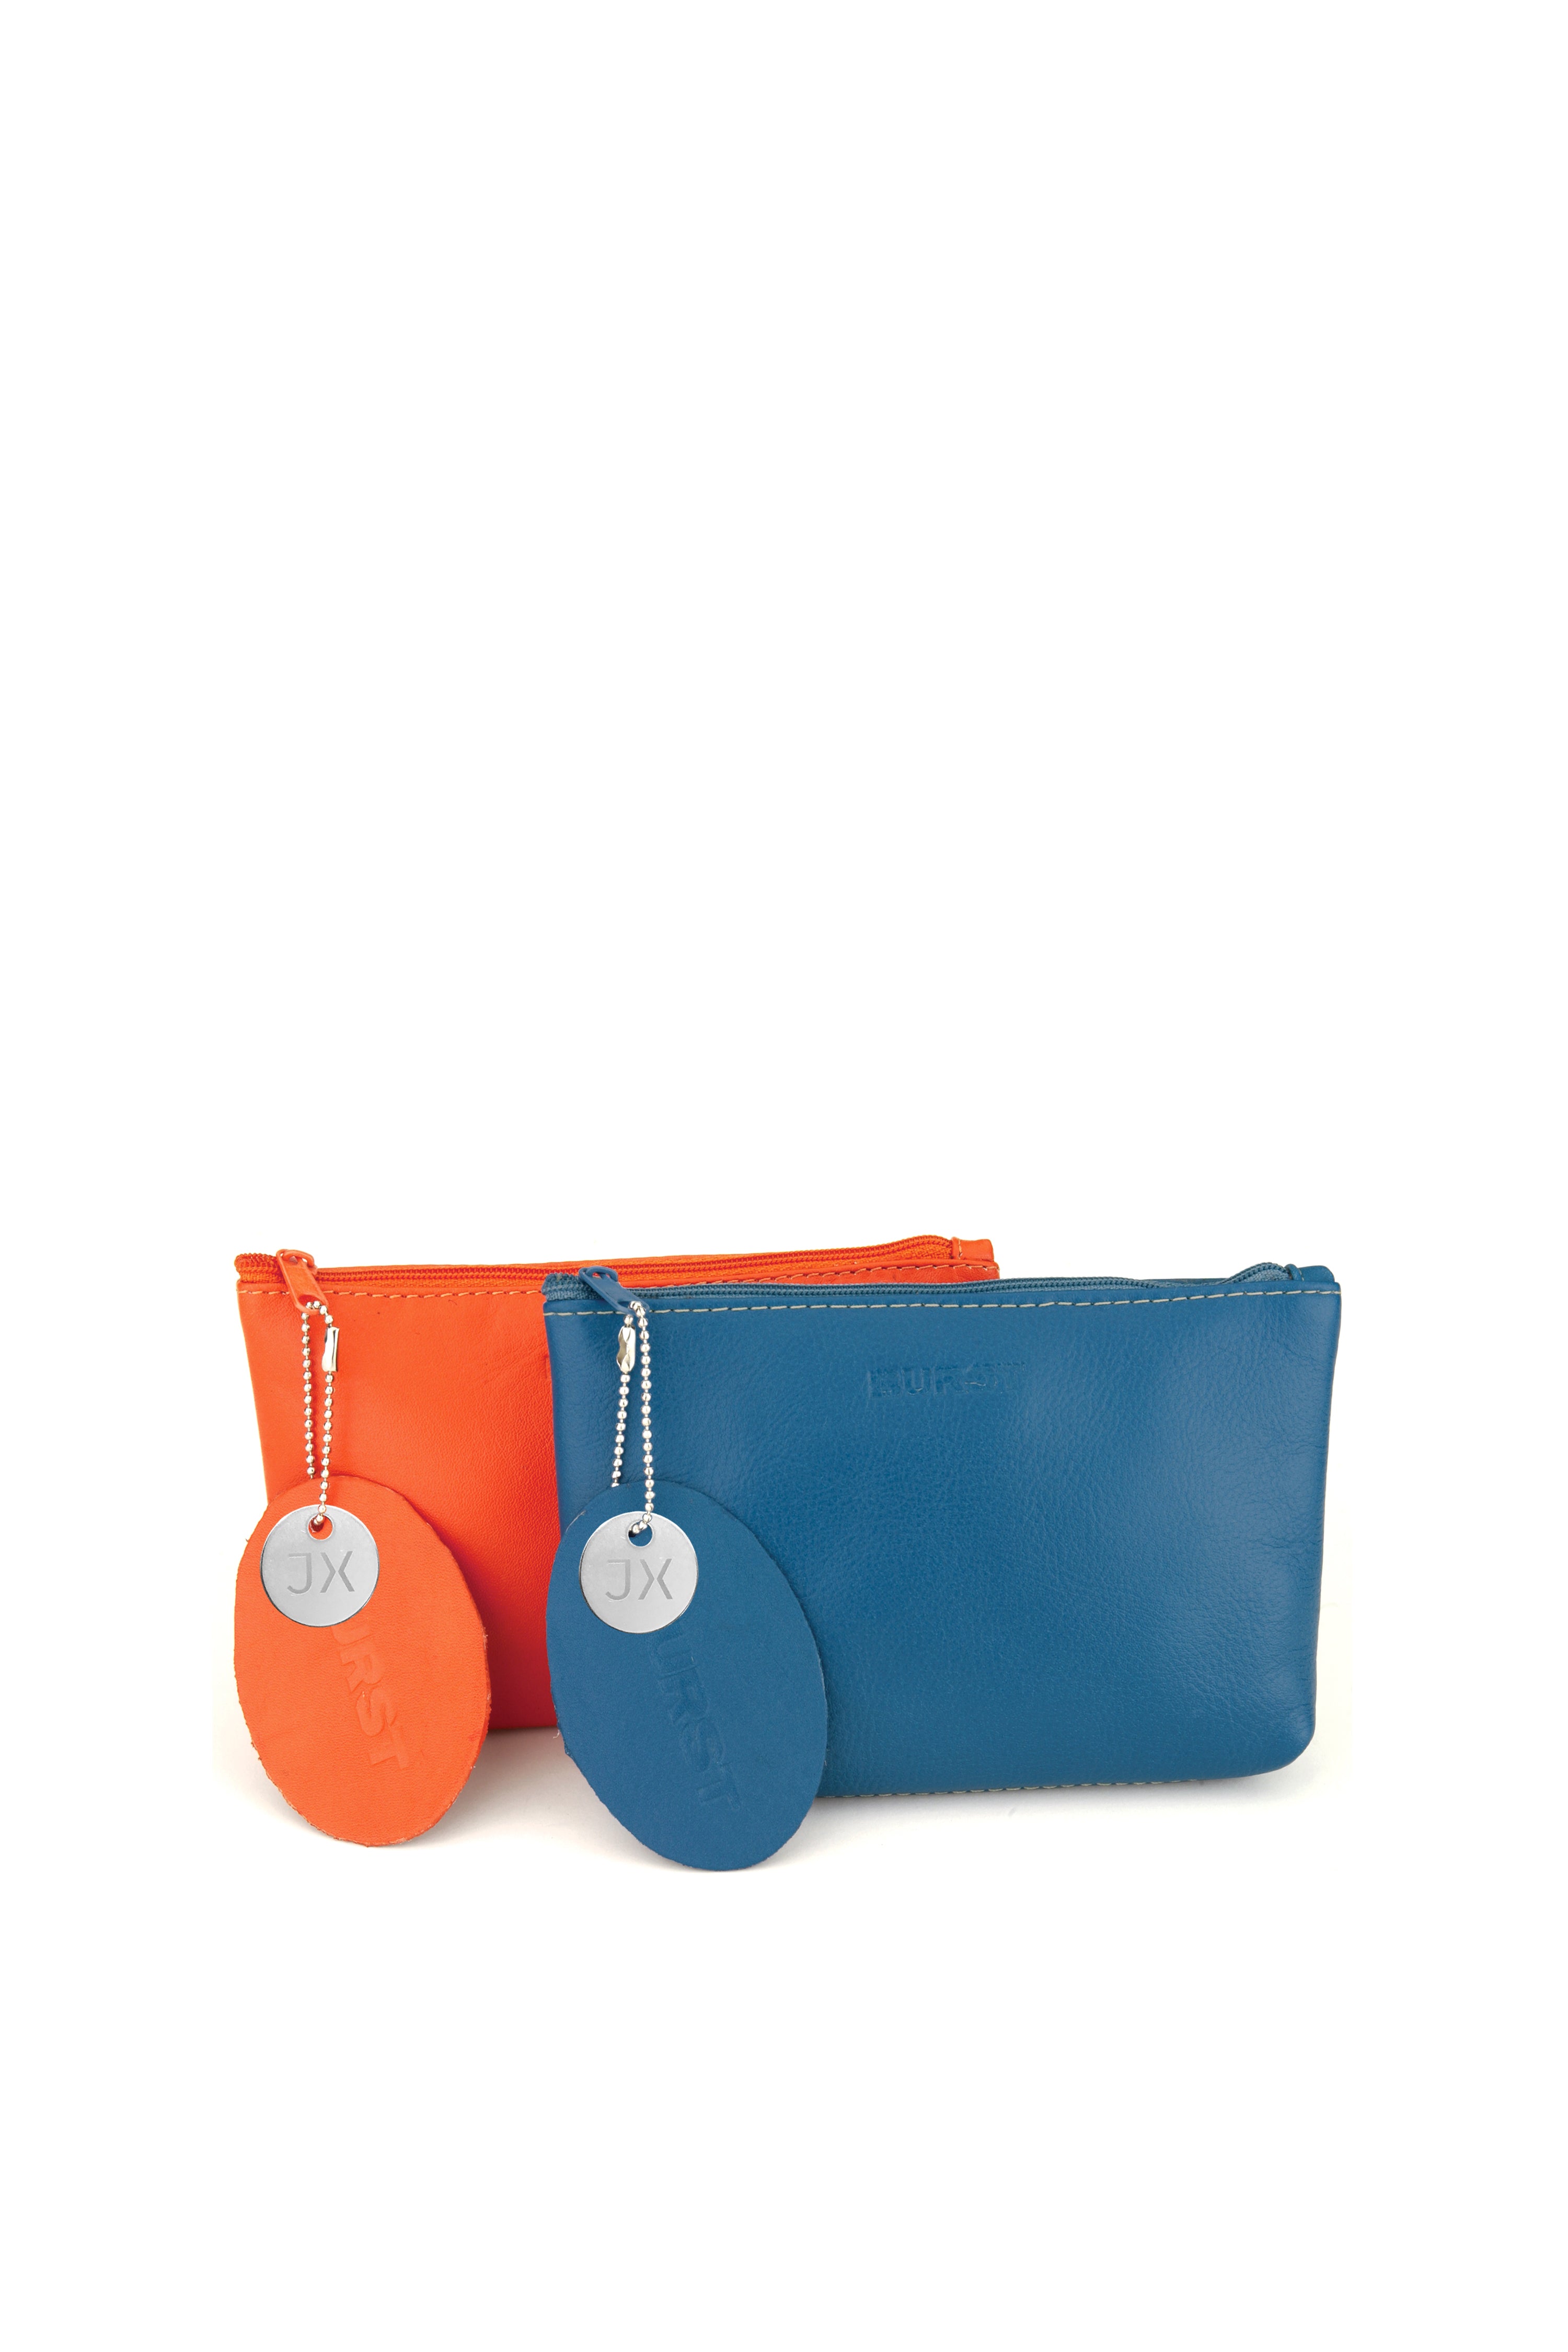 Leather pouch 1: zip close, vivid Mediterranean blue. Vivid pale yellow lining and stitch. Leather pouch 2: zip close, vivid Tangerine orange. Vivid cantaloupe lining and stitch. Upcycled, sustainable